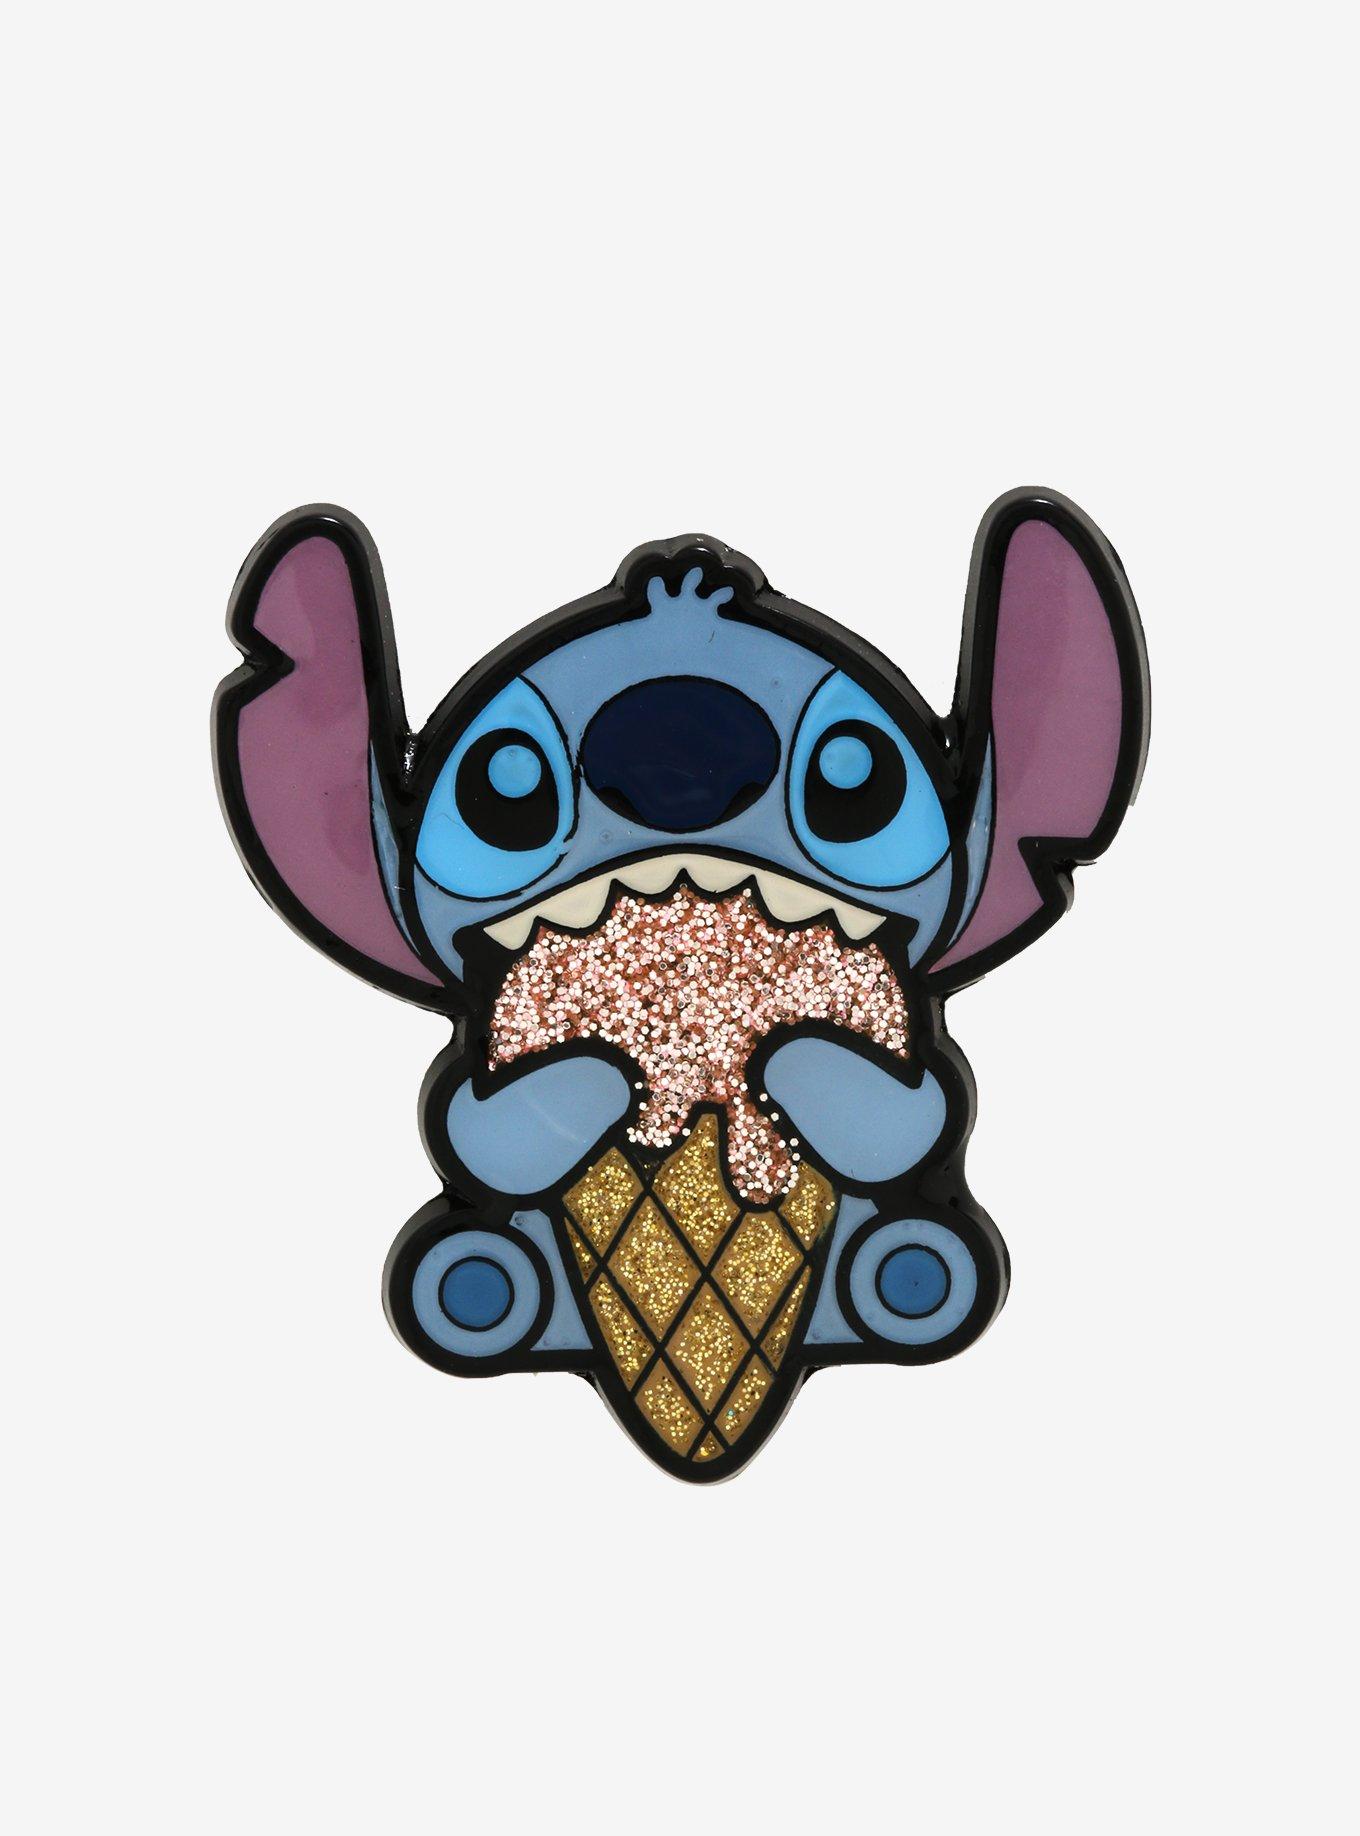 Lilo and Stitch in sunglasses with ice cream cones pin from our Pins  collection, Disney collectibles and memorabilia